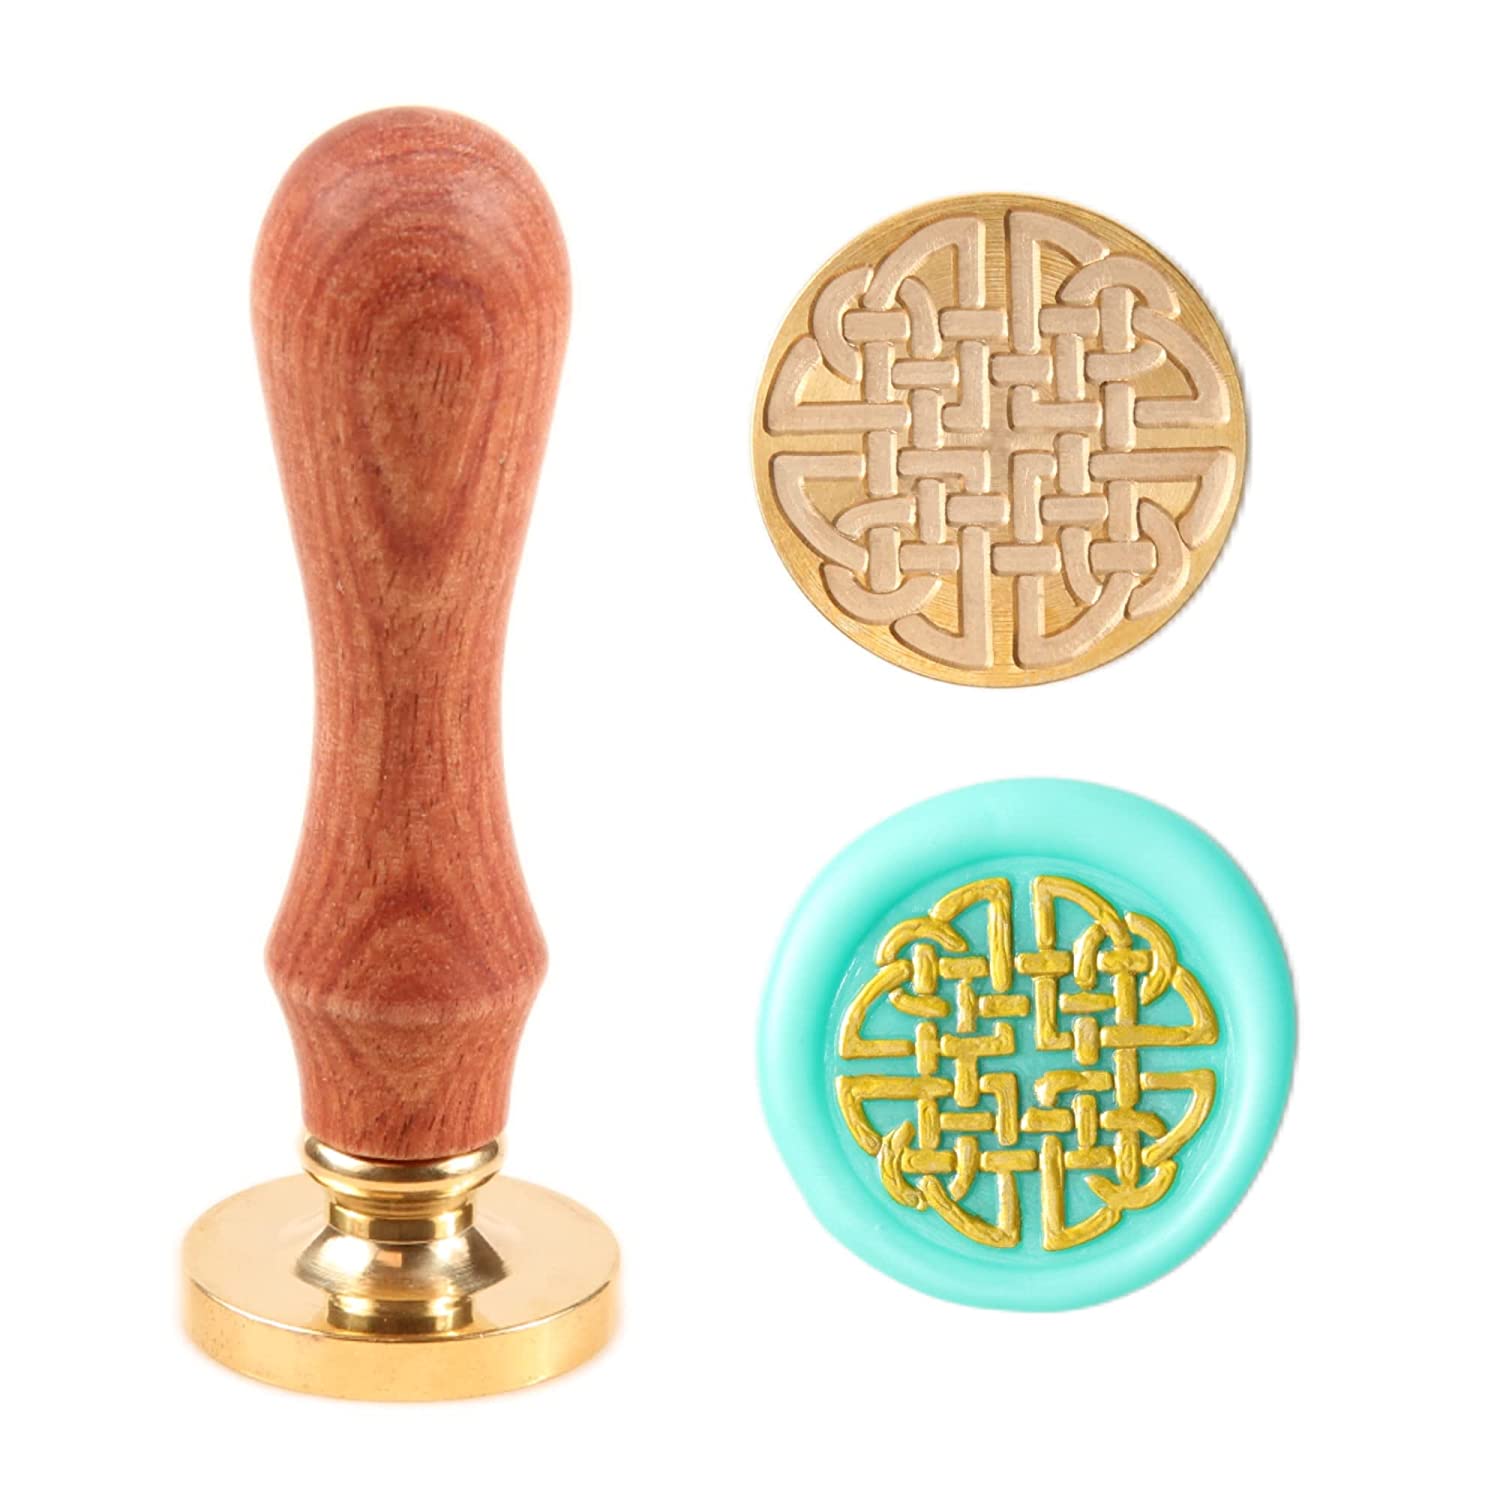 celtic shield knot wax seal stamp kit